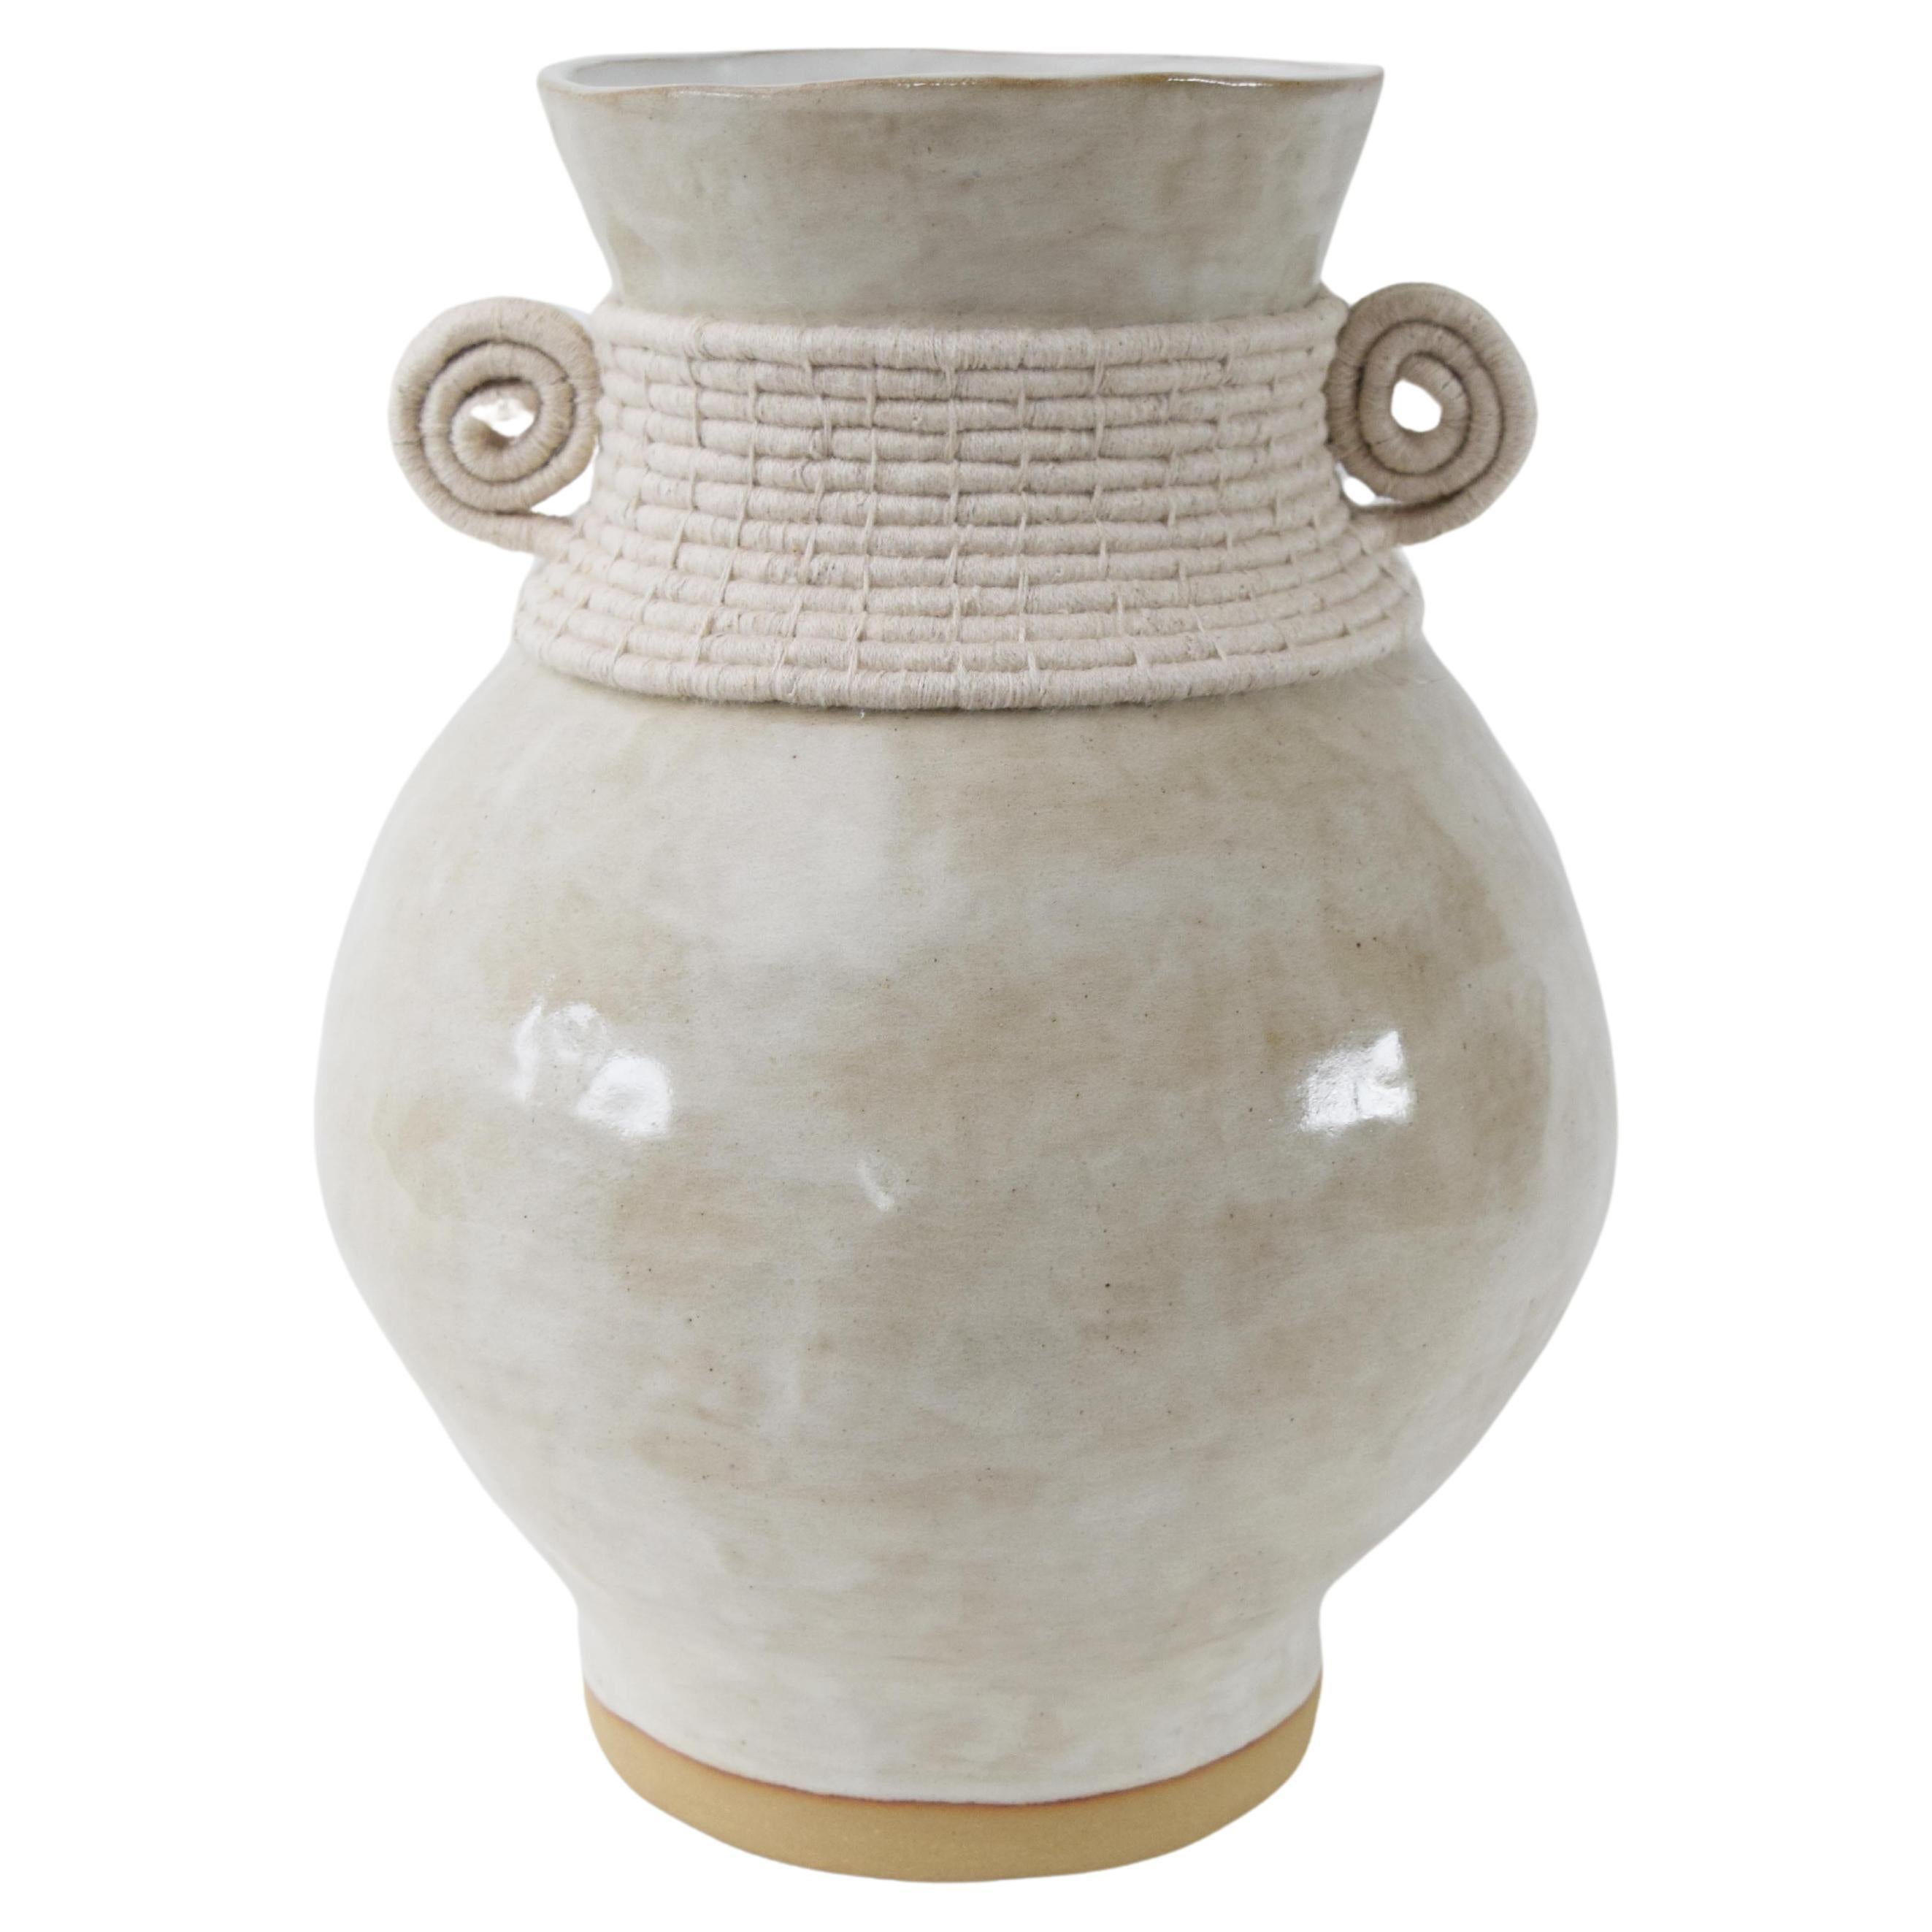 One of a Kind Handmade Ceramic Vase #796 - Off White Glaze & Woven Cotton Detail For Sale